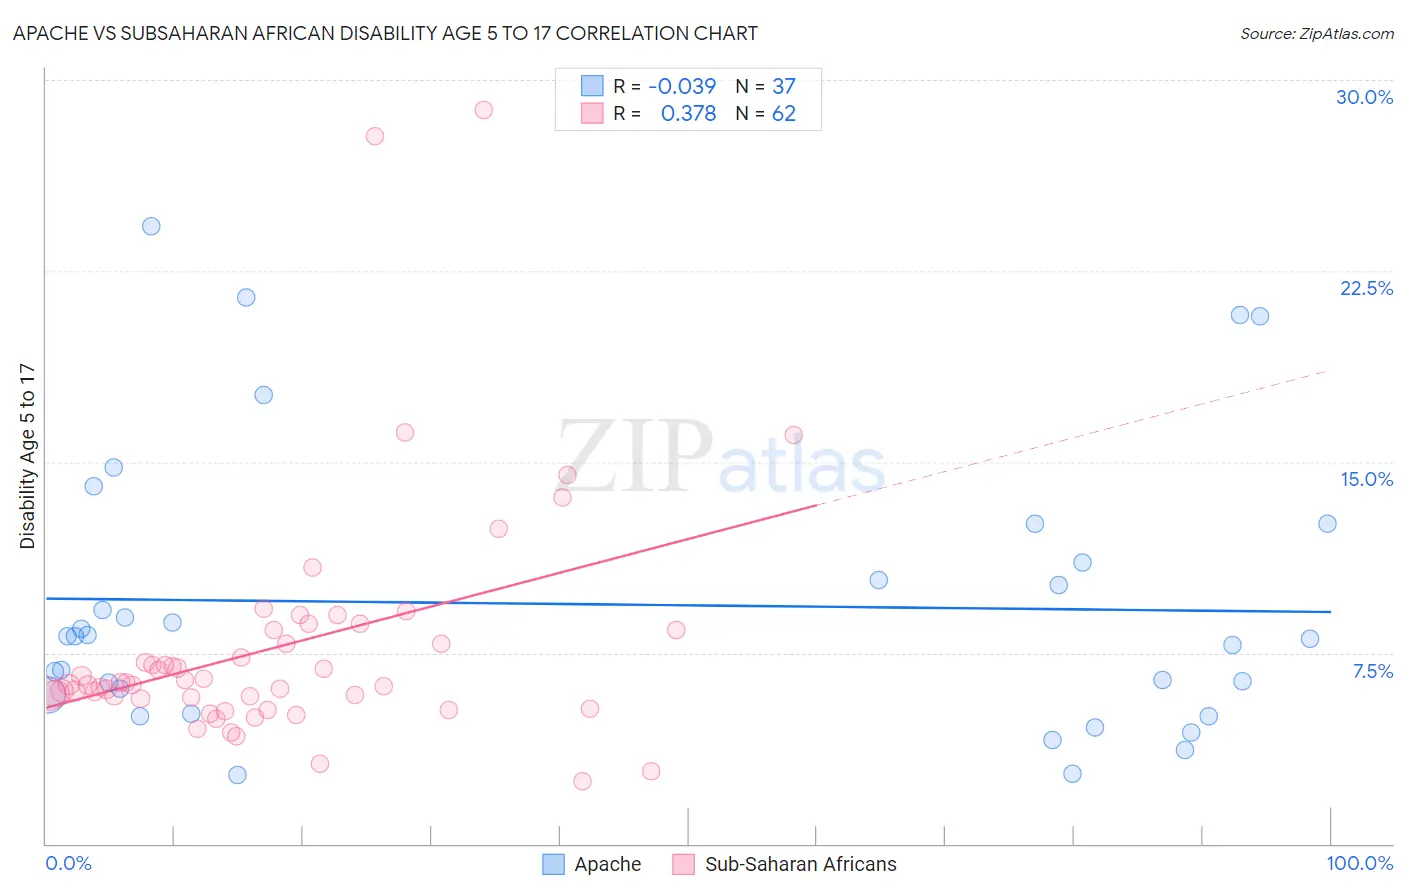 Apache vs Subsaharan African Disability Age 5 to 17